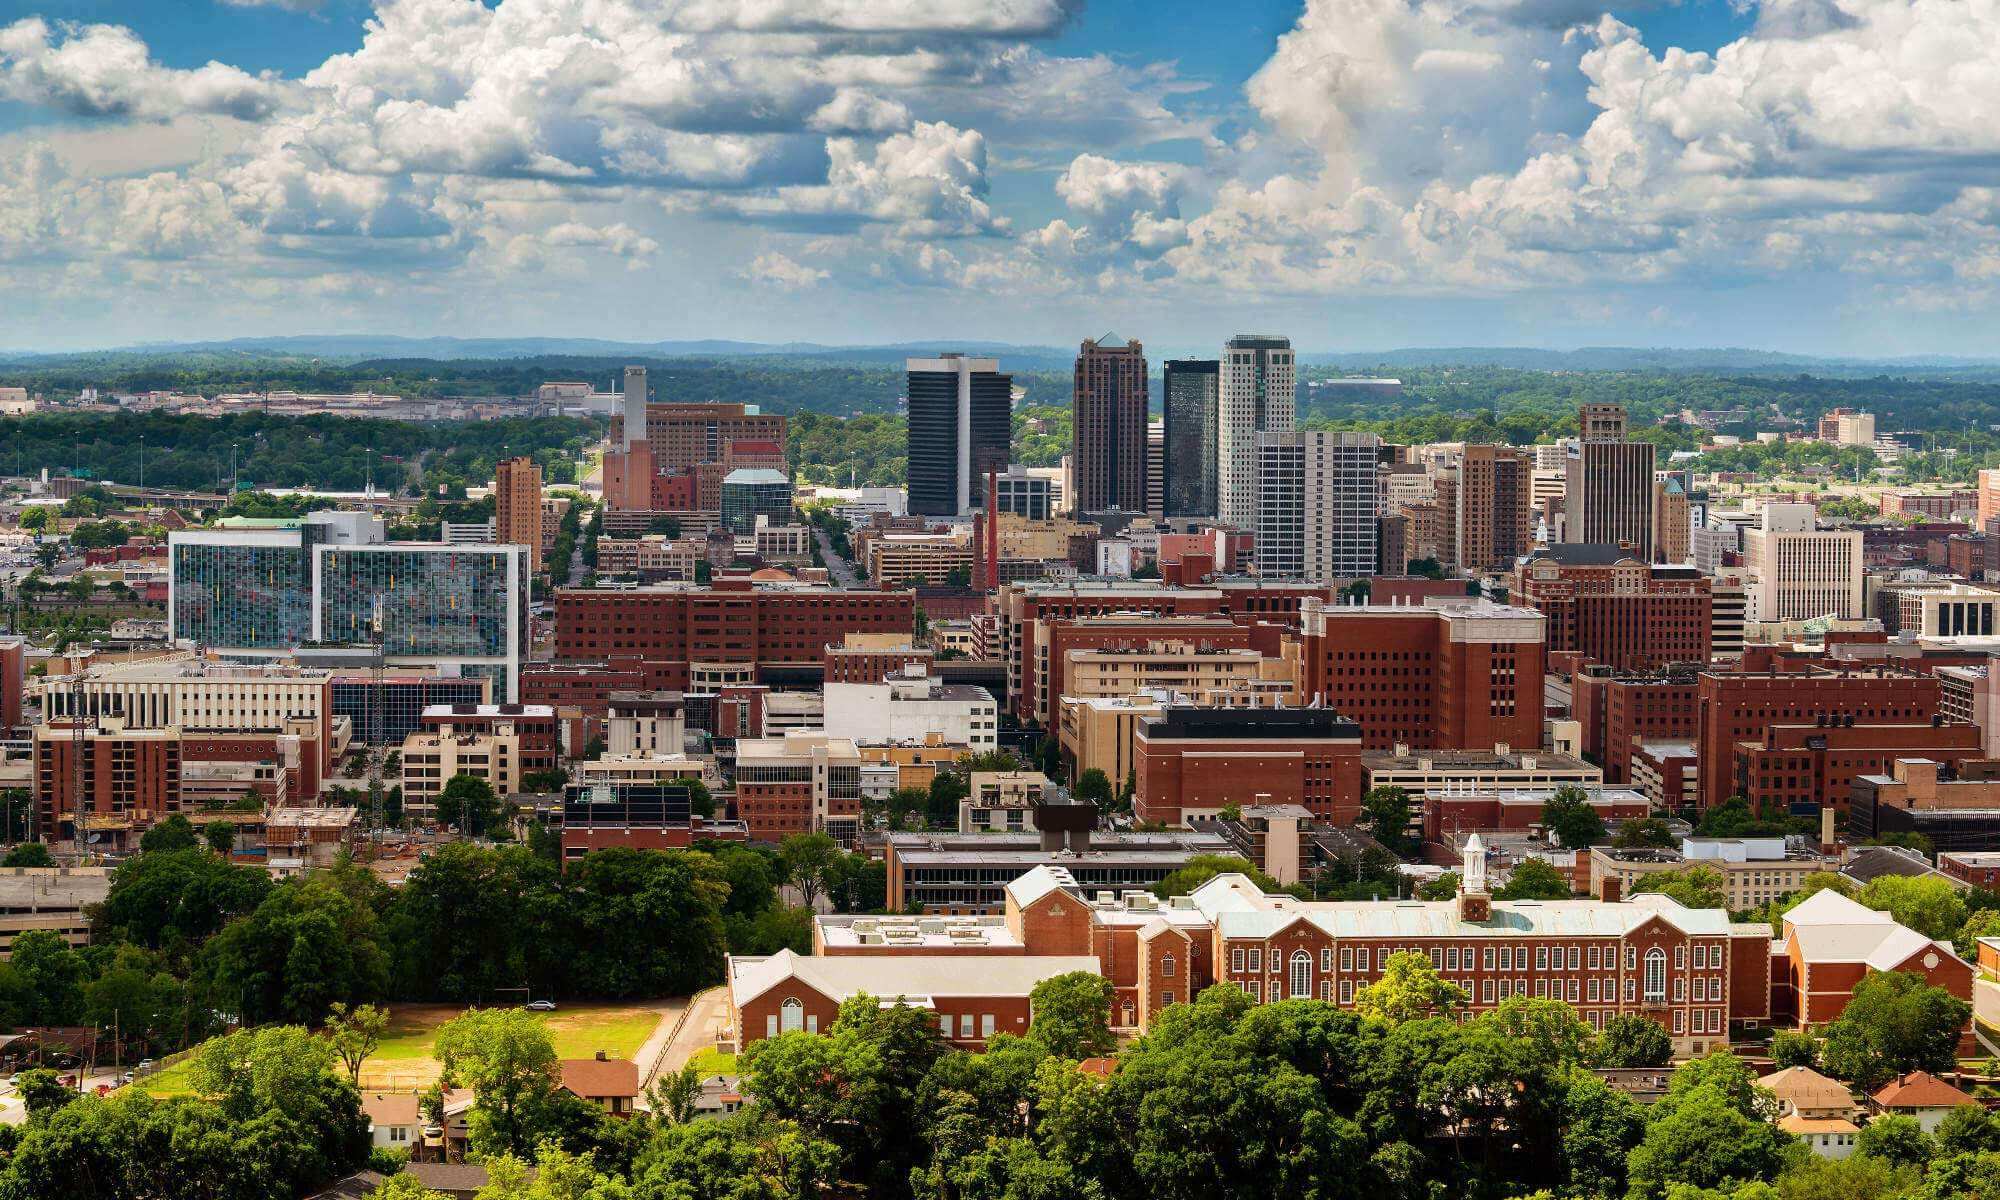 View of downtown Birmingham, Alabama from Vulcan Park